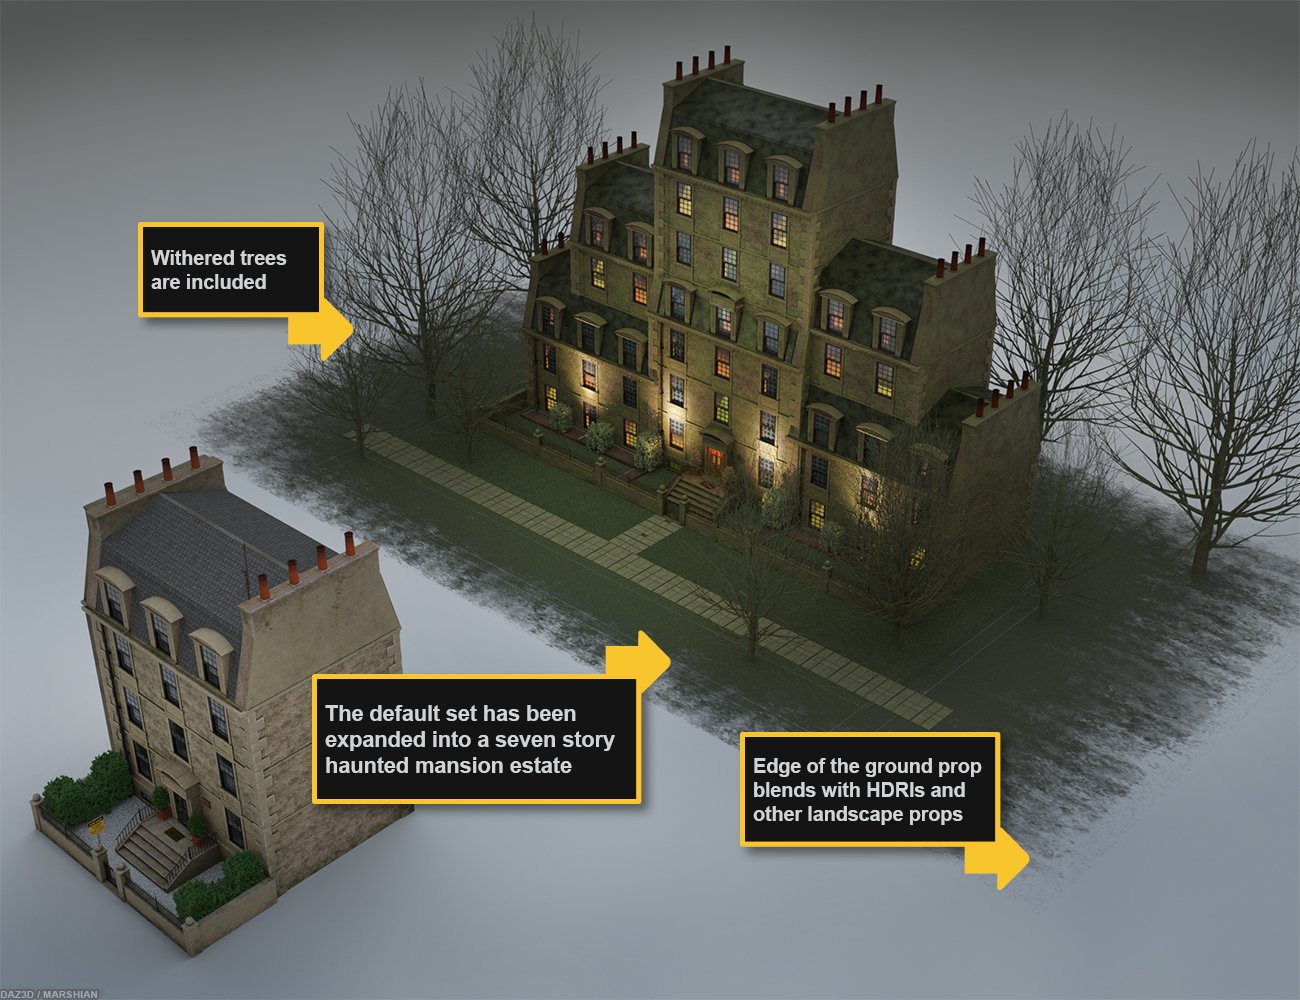 Grovebrook House: A Haunted Add-On by: Marshian, 3D Models by Daz 3D